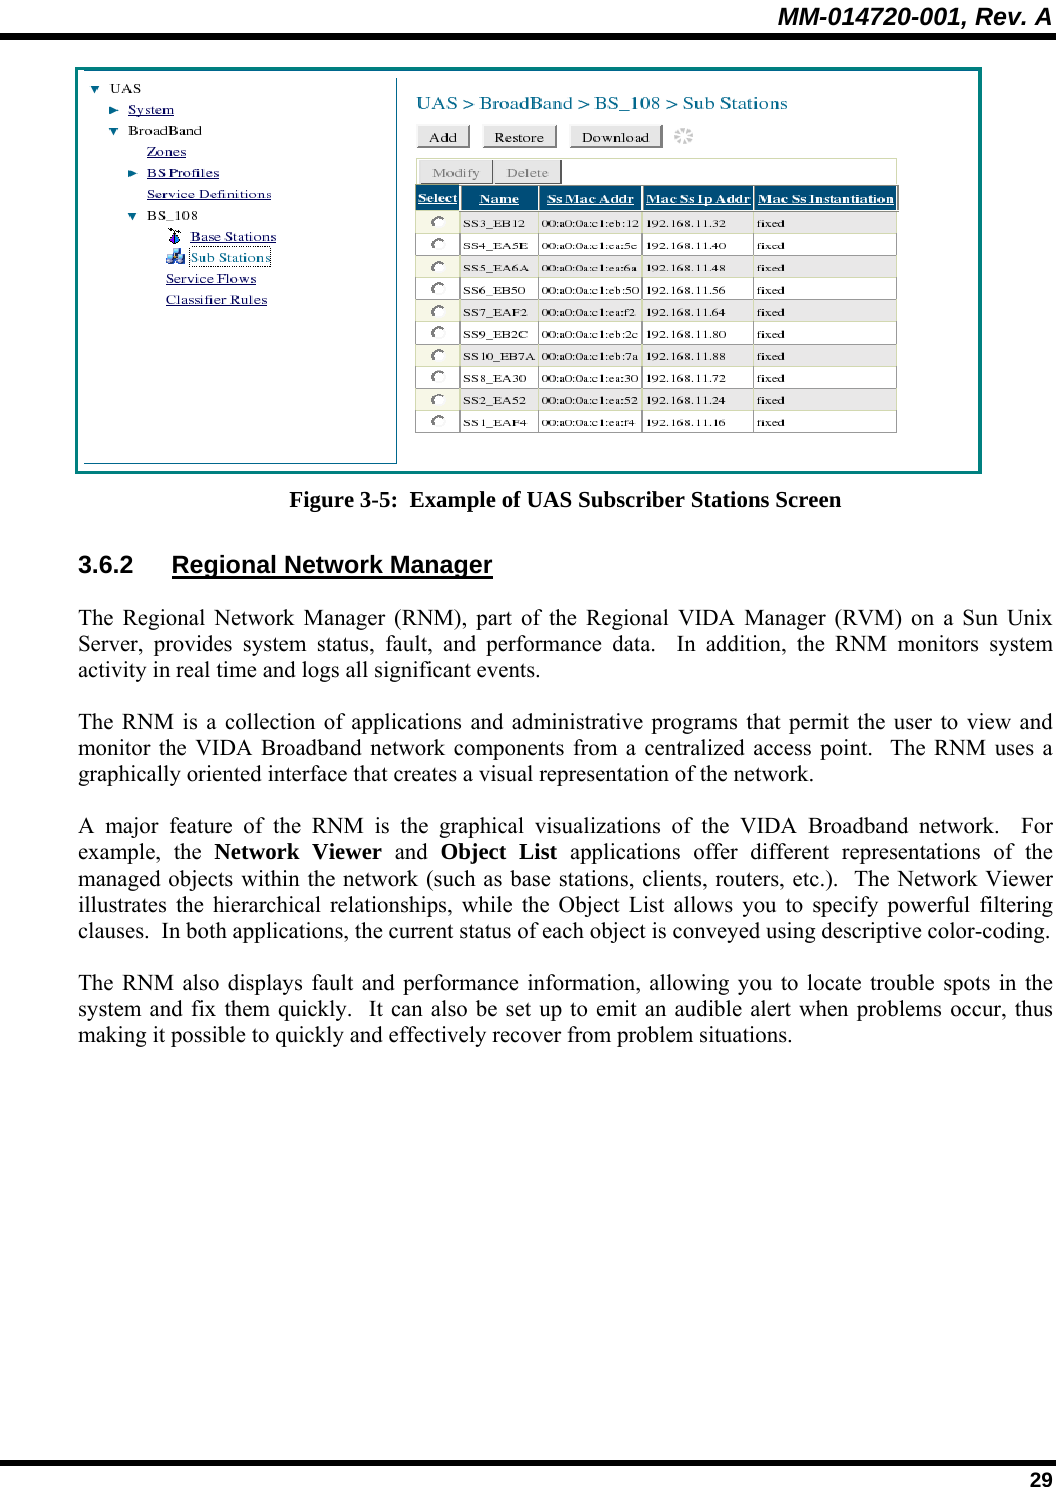 MM-014720-001, Rev. A  29  Figure 3-5:  Example of UAS Subscriber Stations Screen 3.6.2 Regional Network Manager The Regional Network Manager (RNM), part of the Regional VIDA Manager (RVM) on a Sun Unix Server, provides system status, fault, and performance data.  In addition, the RNM monitors system activity in real time and logs all significant events.   The RNM is a collection of applications and administrative programs that permit the user to view and monitor the VIDA Broadband network components from a centralized access point.  The RNM uses a graphically oriented interface that creates a visual representation of the network. A major feature of the RNM is the graphical visualizations of the VIDA Broadband network.  For example, the Network Viewer and  Object List applications offer different representations of the managed objects within the network (such as base stations, clients, routers, etc.).  The Network Viewer illustrates the hierarchical relationships, while the Object List allows you to specify powerful filtering clauses.  In both applications, the current status of each object is conveyed using descriptive color-coding. The RNM also displays fault and performance information, allowing you to locate trouble spots in the system and fix them quickly.  It can also be set up to emit an audible alert when problems occur, thus making it possible to quickly and effectively recover from problem situations. 